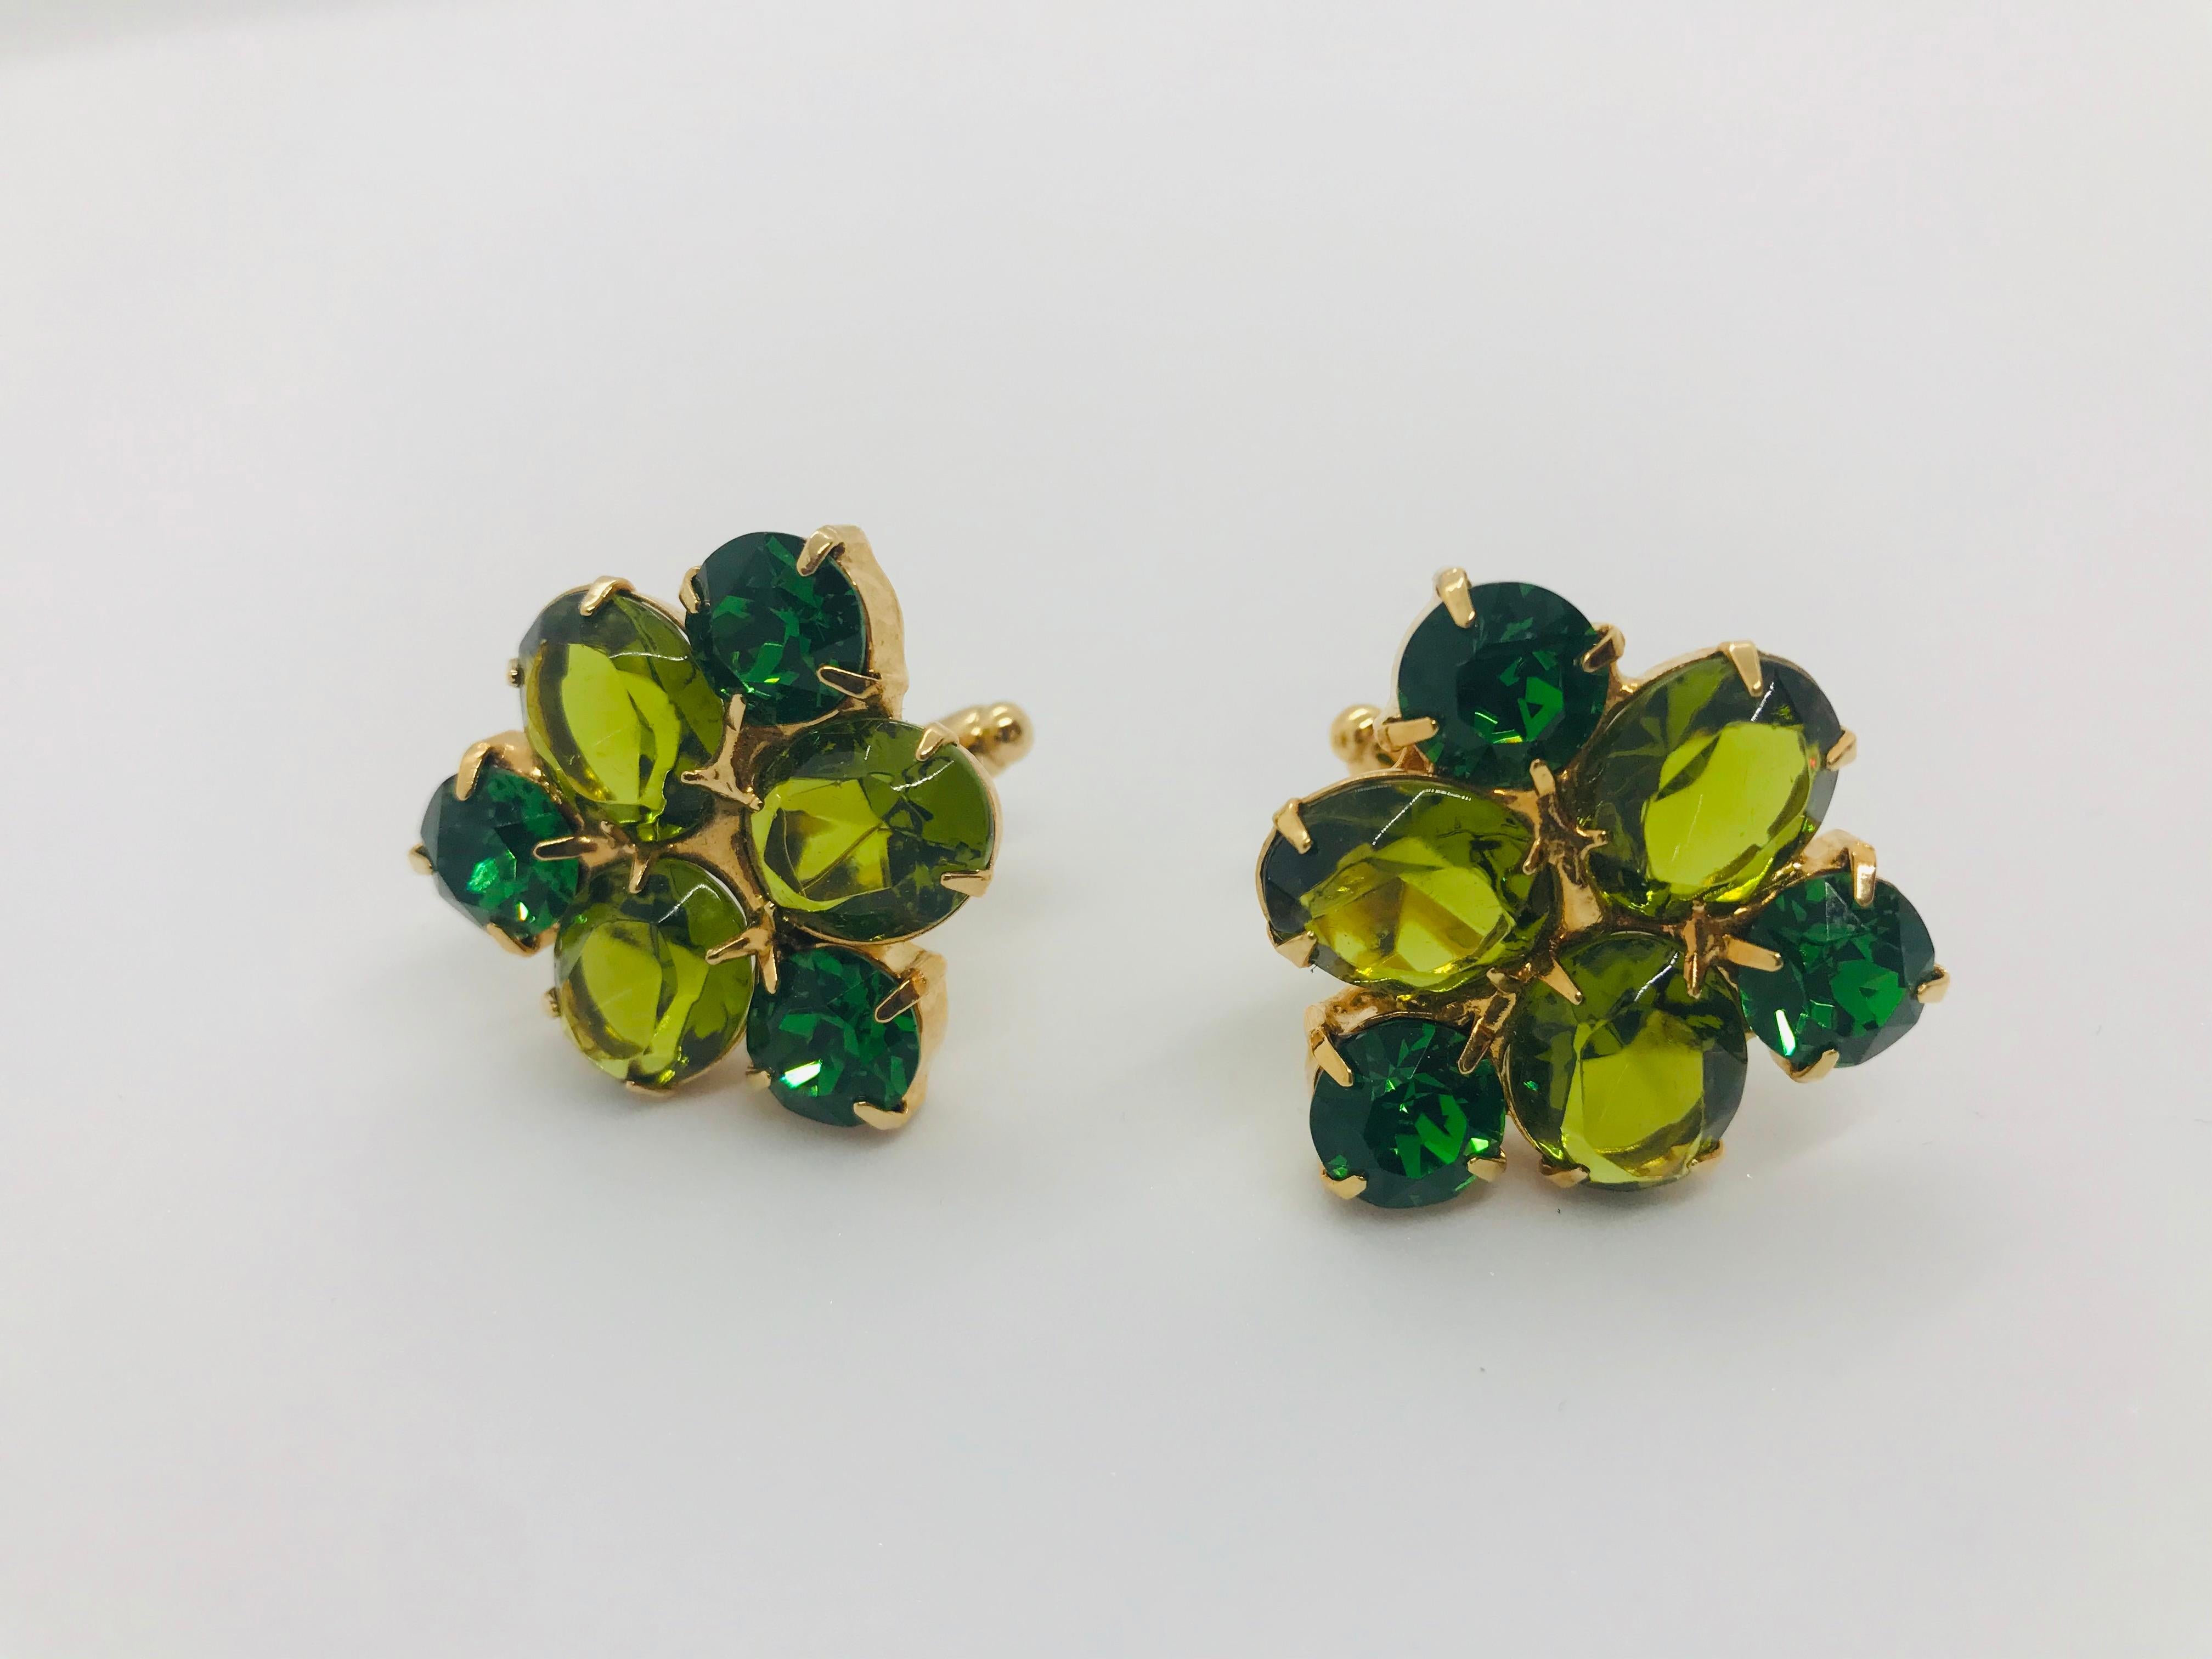 Green as the Emerald Isle is the best way to describe these olivine Austrian crystal cuff links! These  cufflinks feature vintage 1950s unfoiled Austrian crystal Olivine stones, accented with dark moss foiled Swarovski crystals. They are plated in